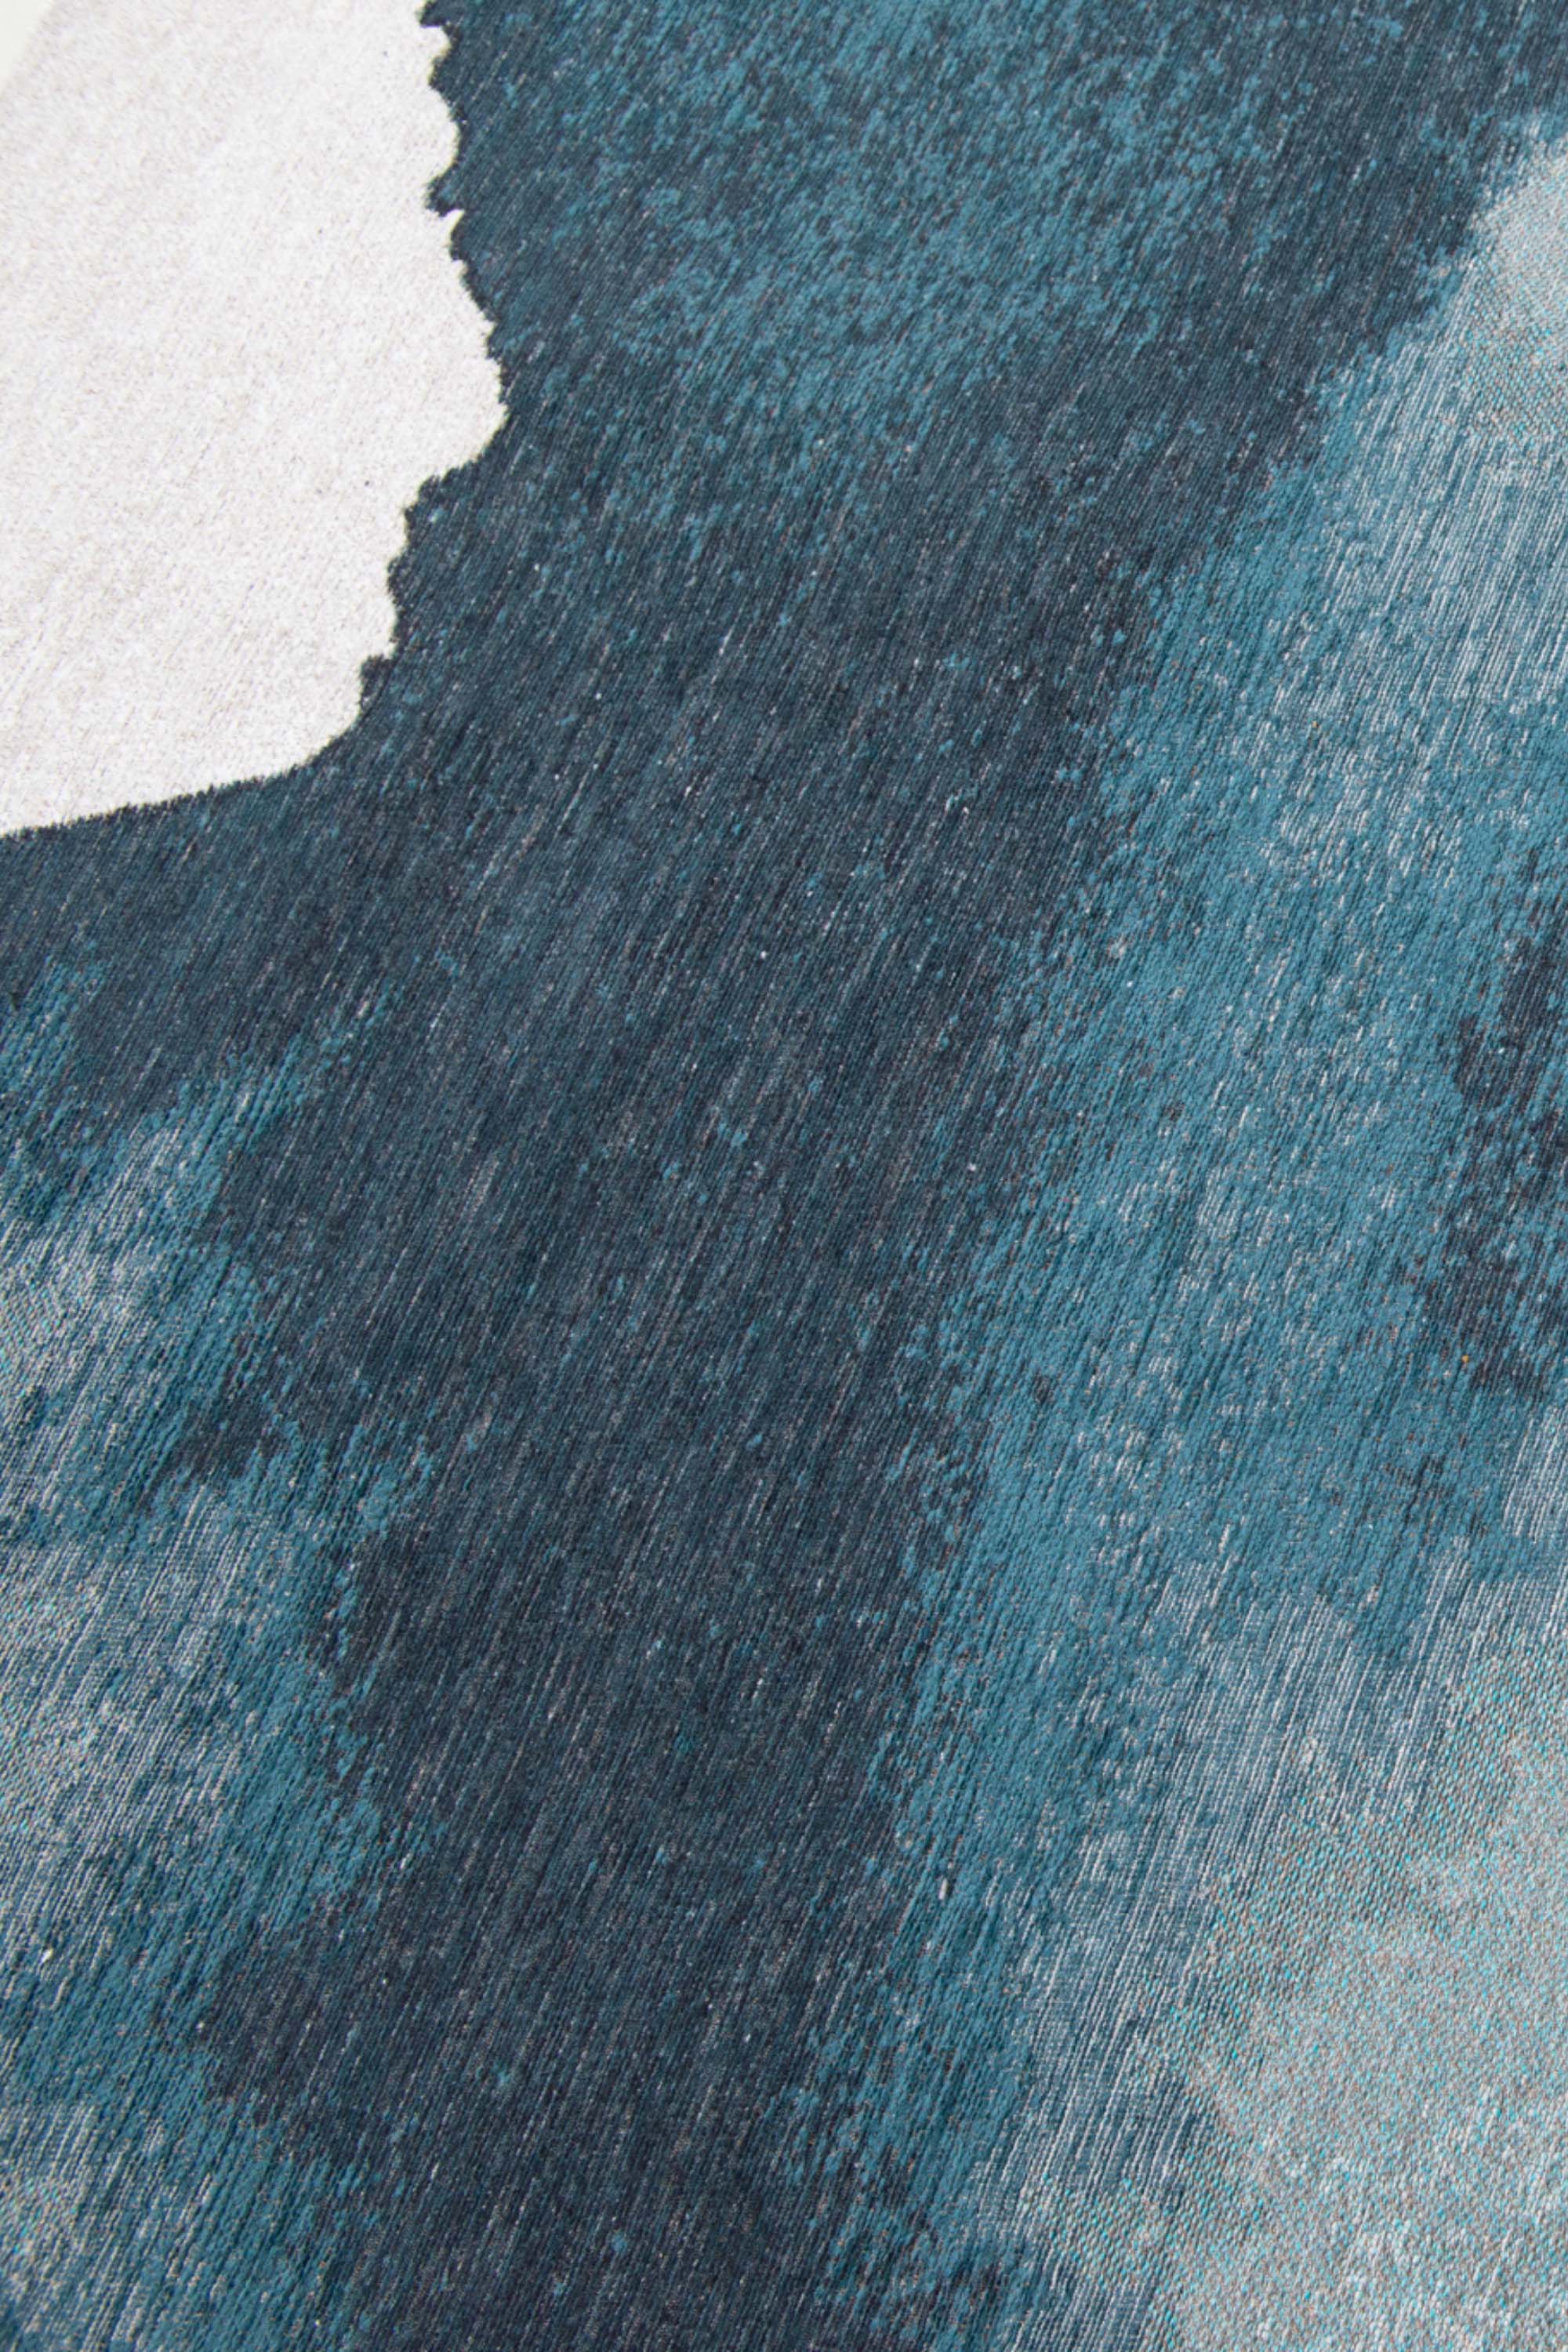 Modern rug with blue abstract shoreline pattern